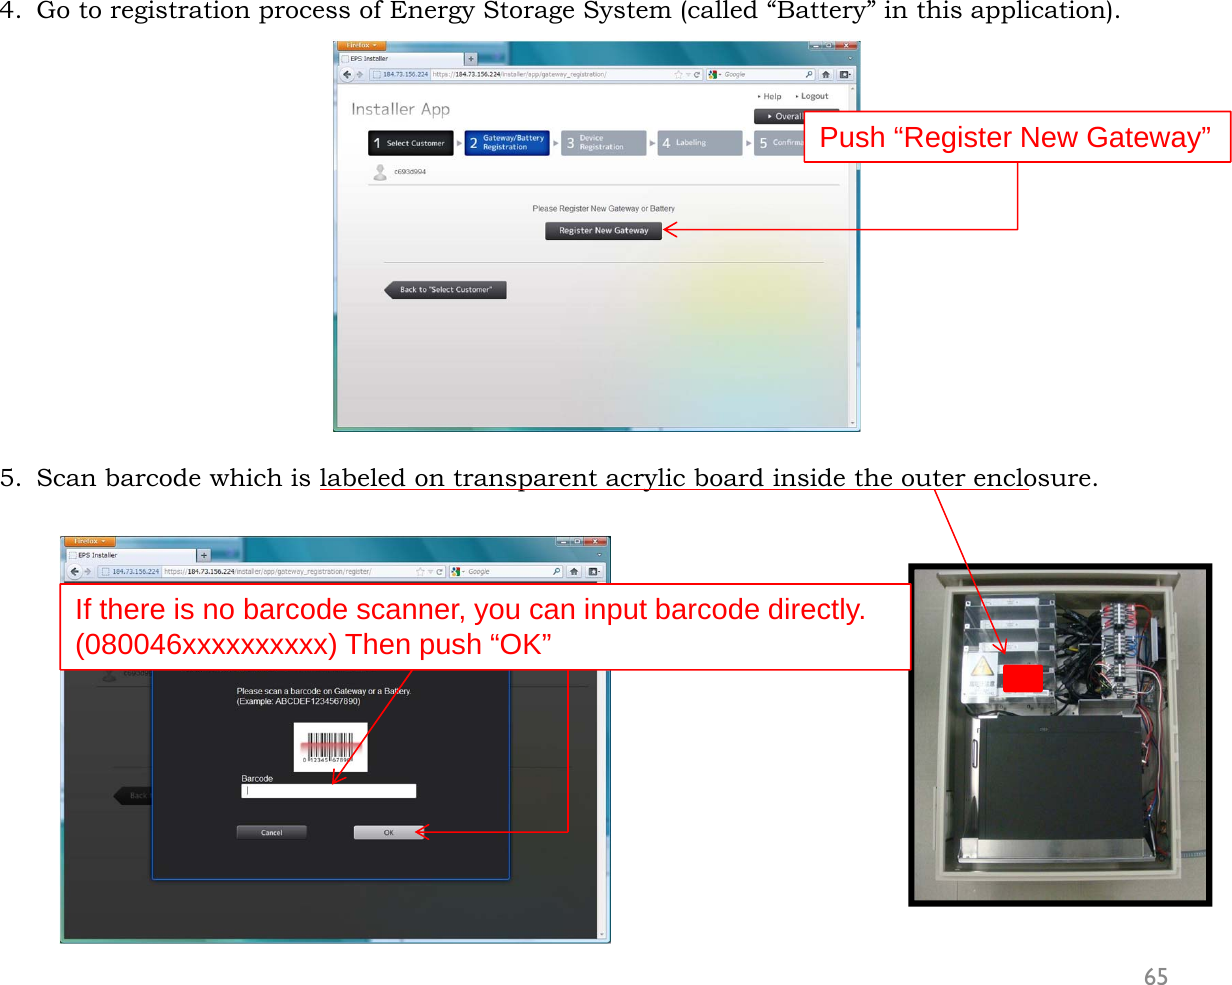 4. Go to registration process of Energy Storage System (called “Battery” in this application).5. Scan barcode which is labeled on transparent acrylic board inside the outer enclosure.65Push “Register New Gateway”If there is no barcode scanner, you can input barcode directly.(080046xxxxxxxxxx) Then push “OK”